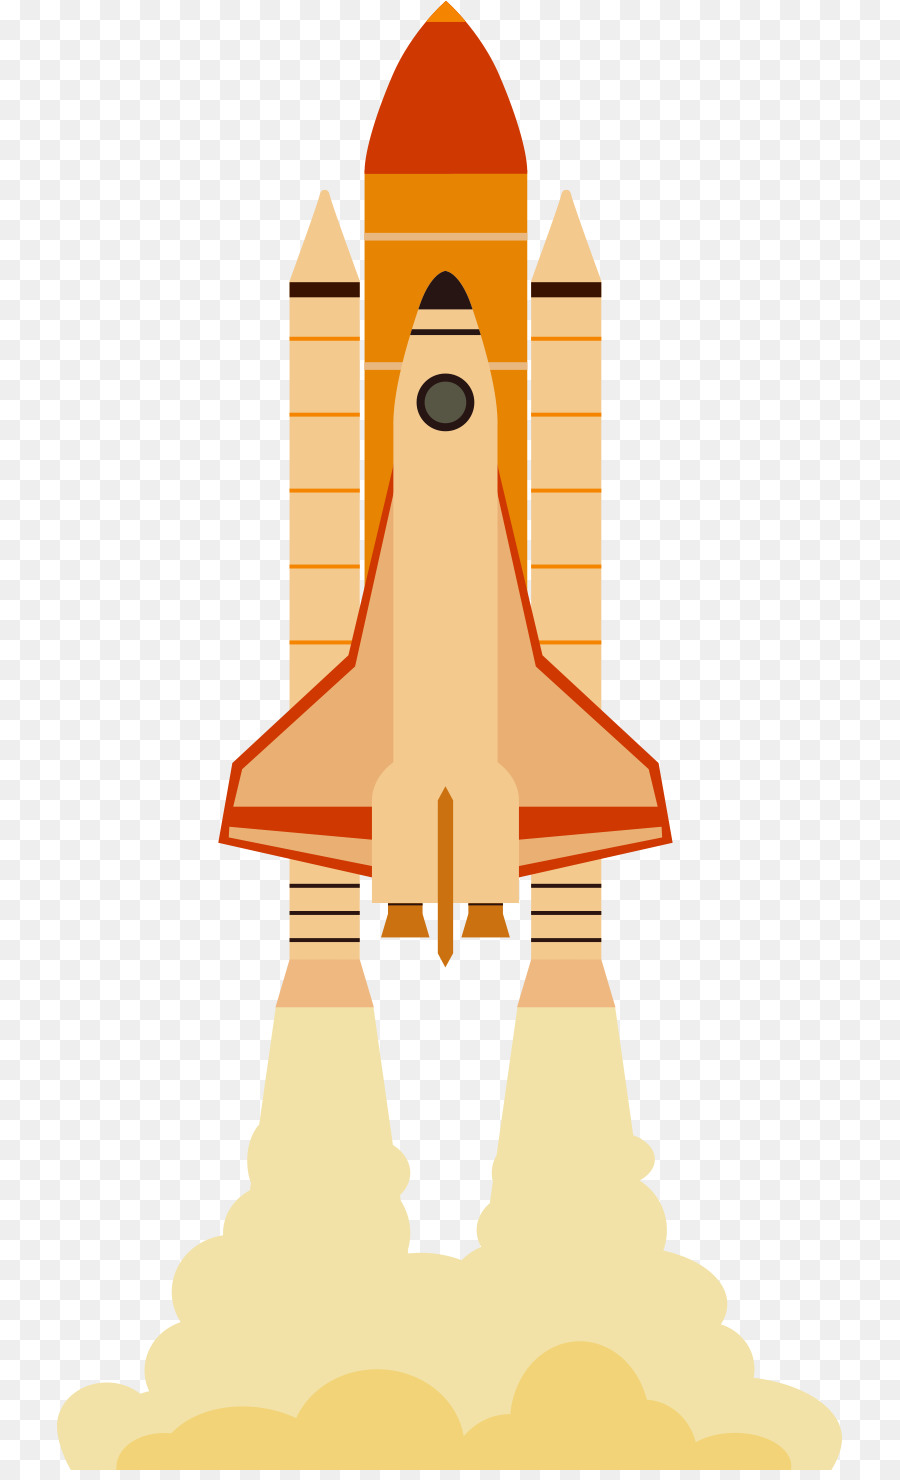 Download free png launch. Clipart rocket countdown